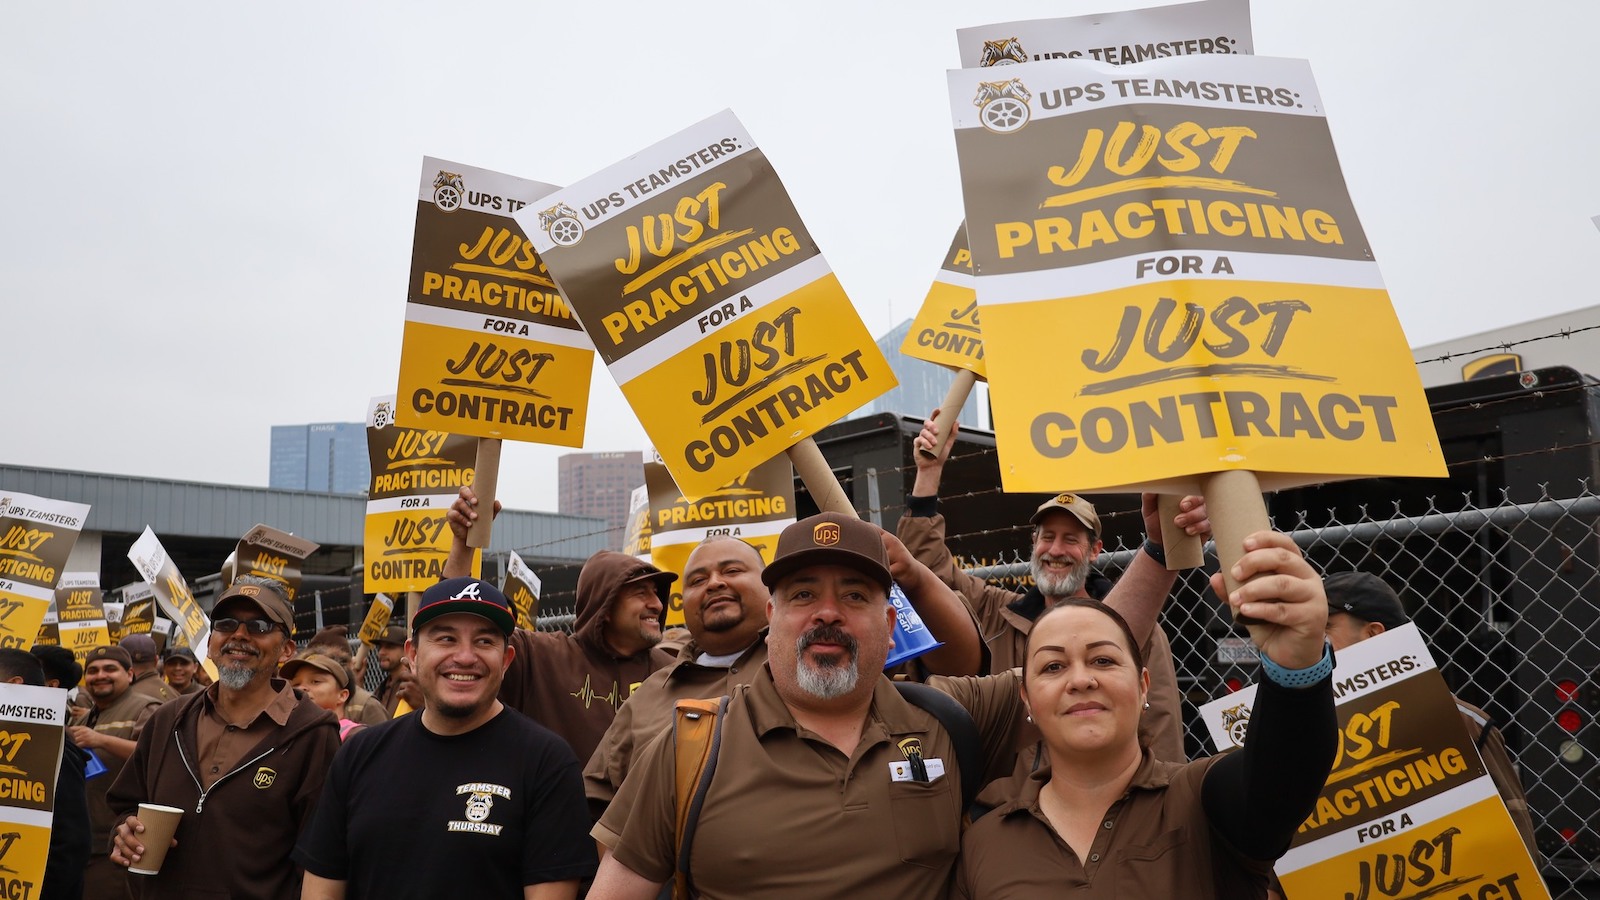 UPS workers in brown uniforms standing outside a warehouse, holding signs that say "Just Practicing for a Just Contract"